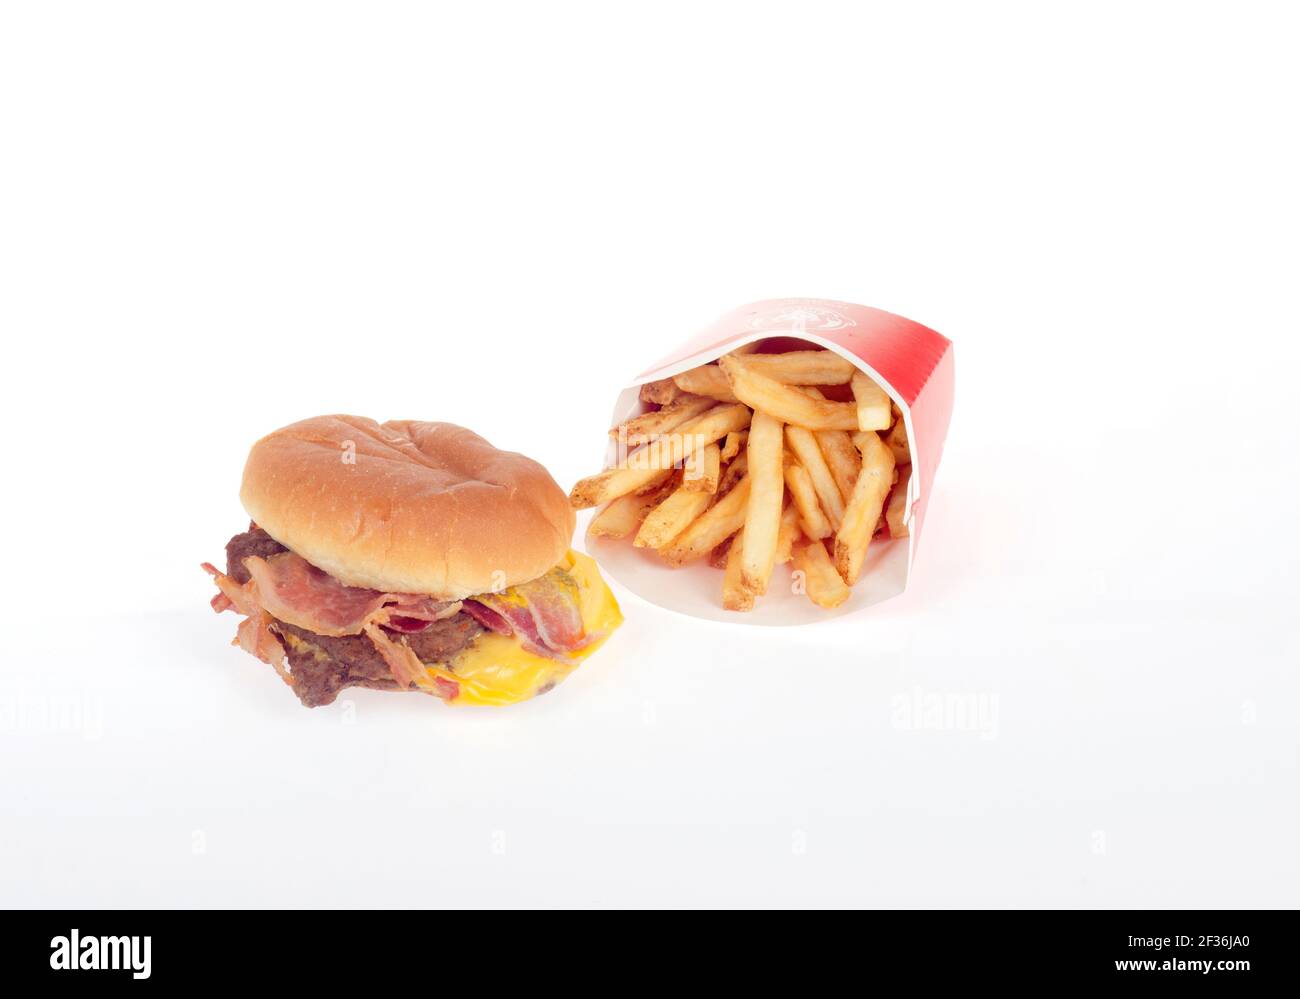 Wendy's Bacon Double Stack Cheeseburger in a Bun bestehend aus 2 Patties, Bacon & Cheese mit Pommes aka Chips Stockfoto